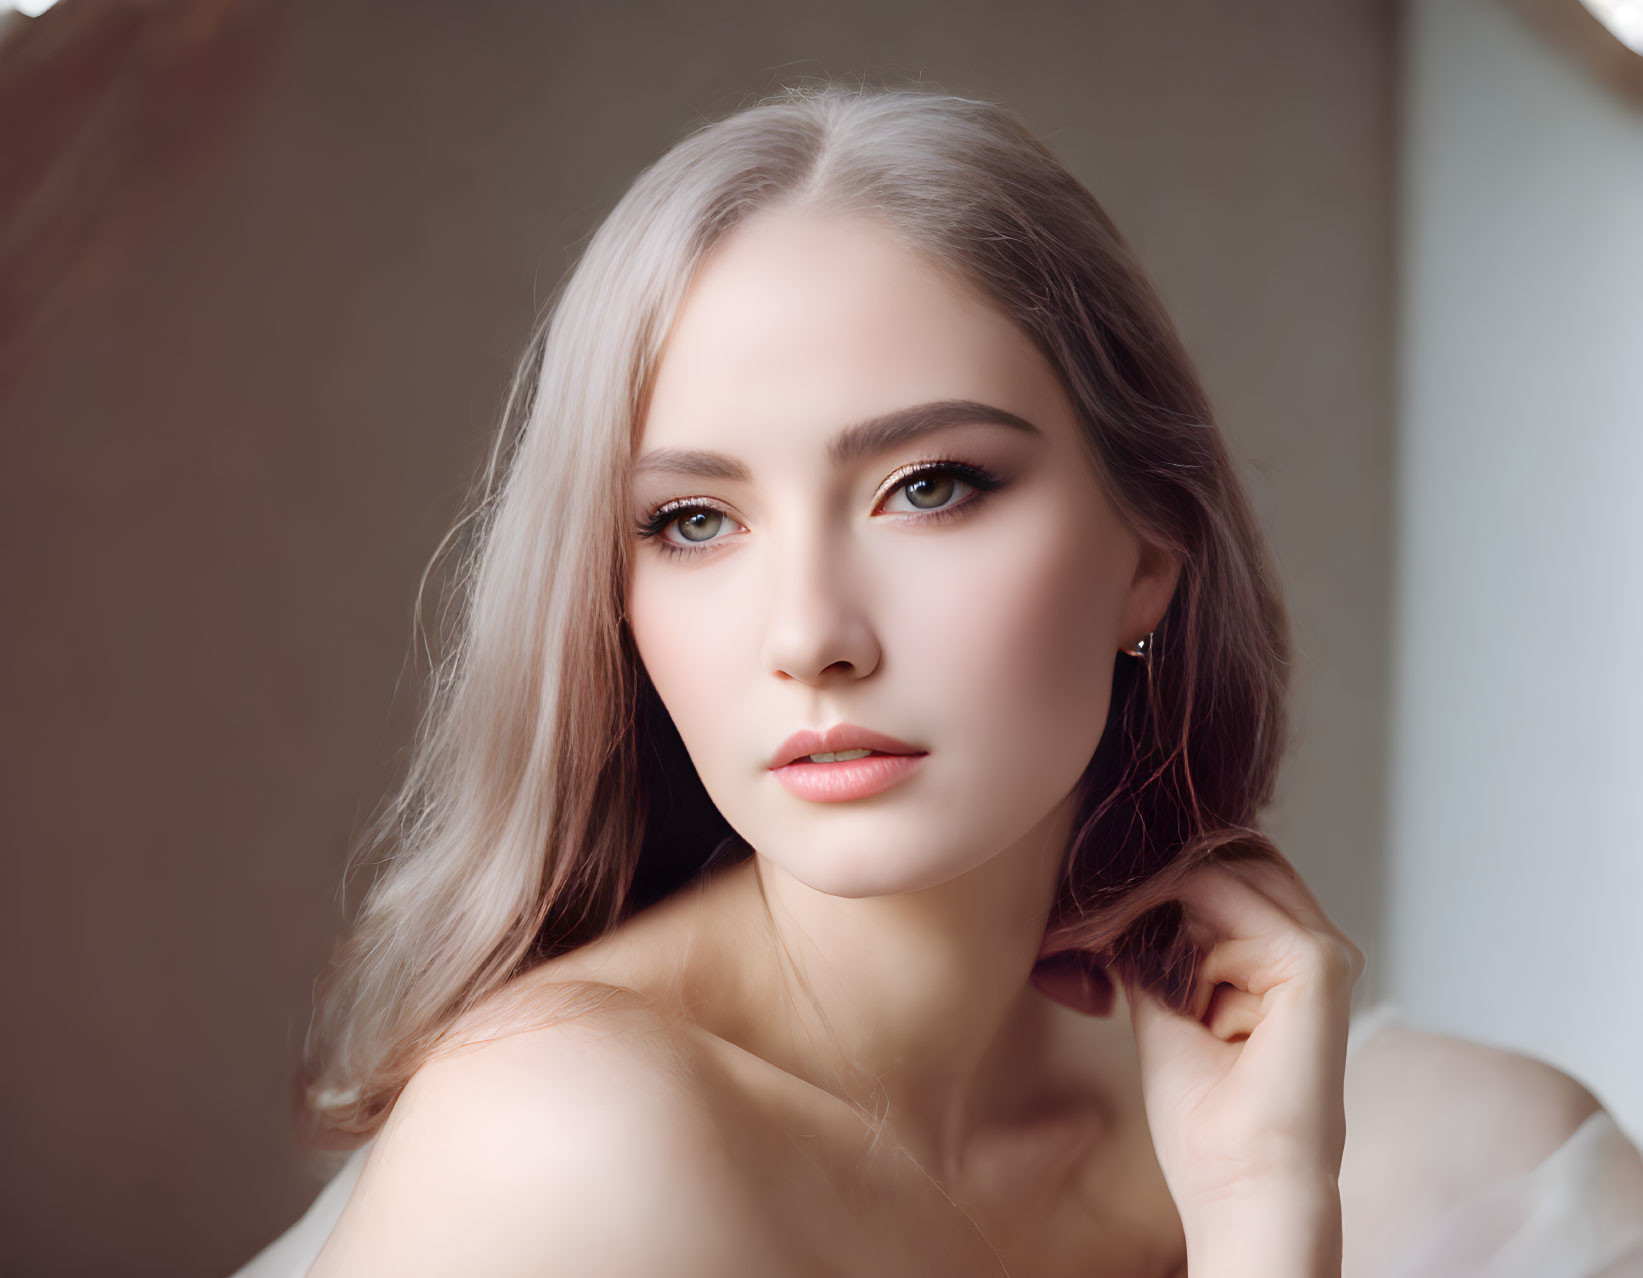 Portrait of Woman with Silver Blonde Hair and Striking Makeup on Neutral Backdrop